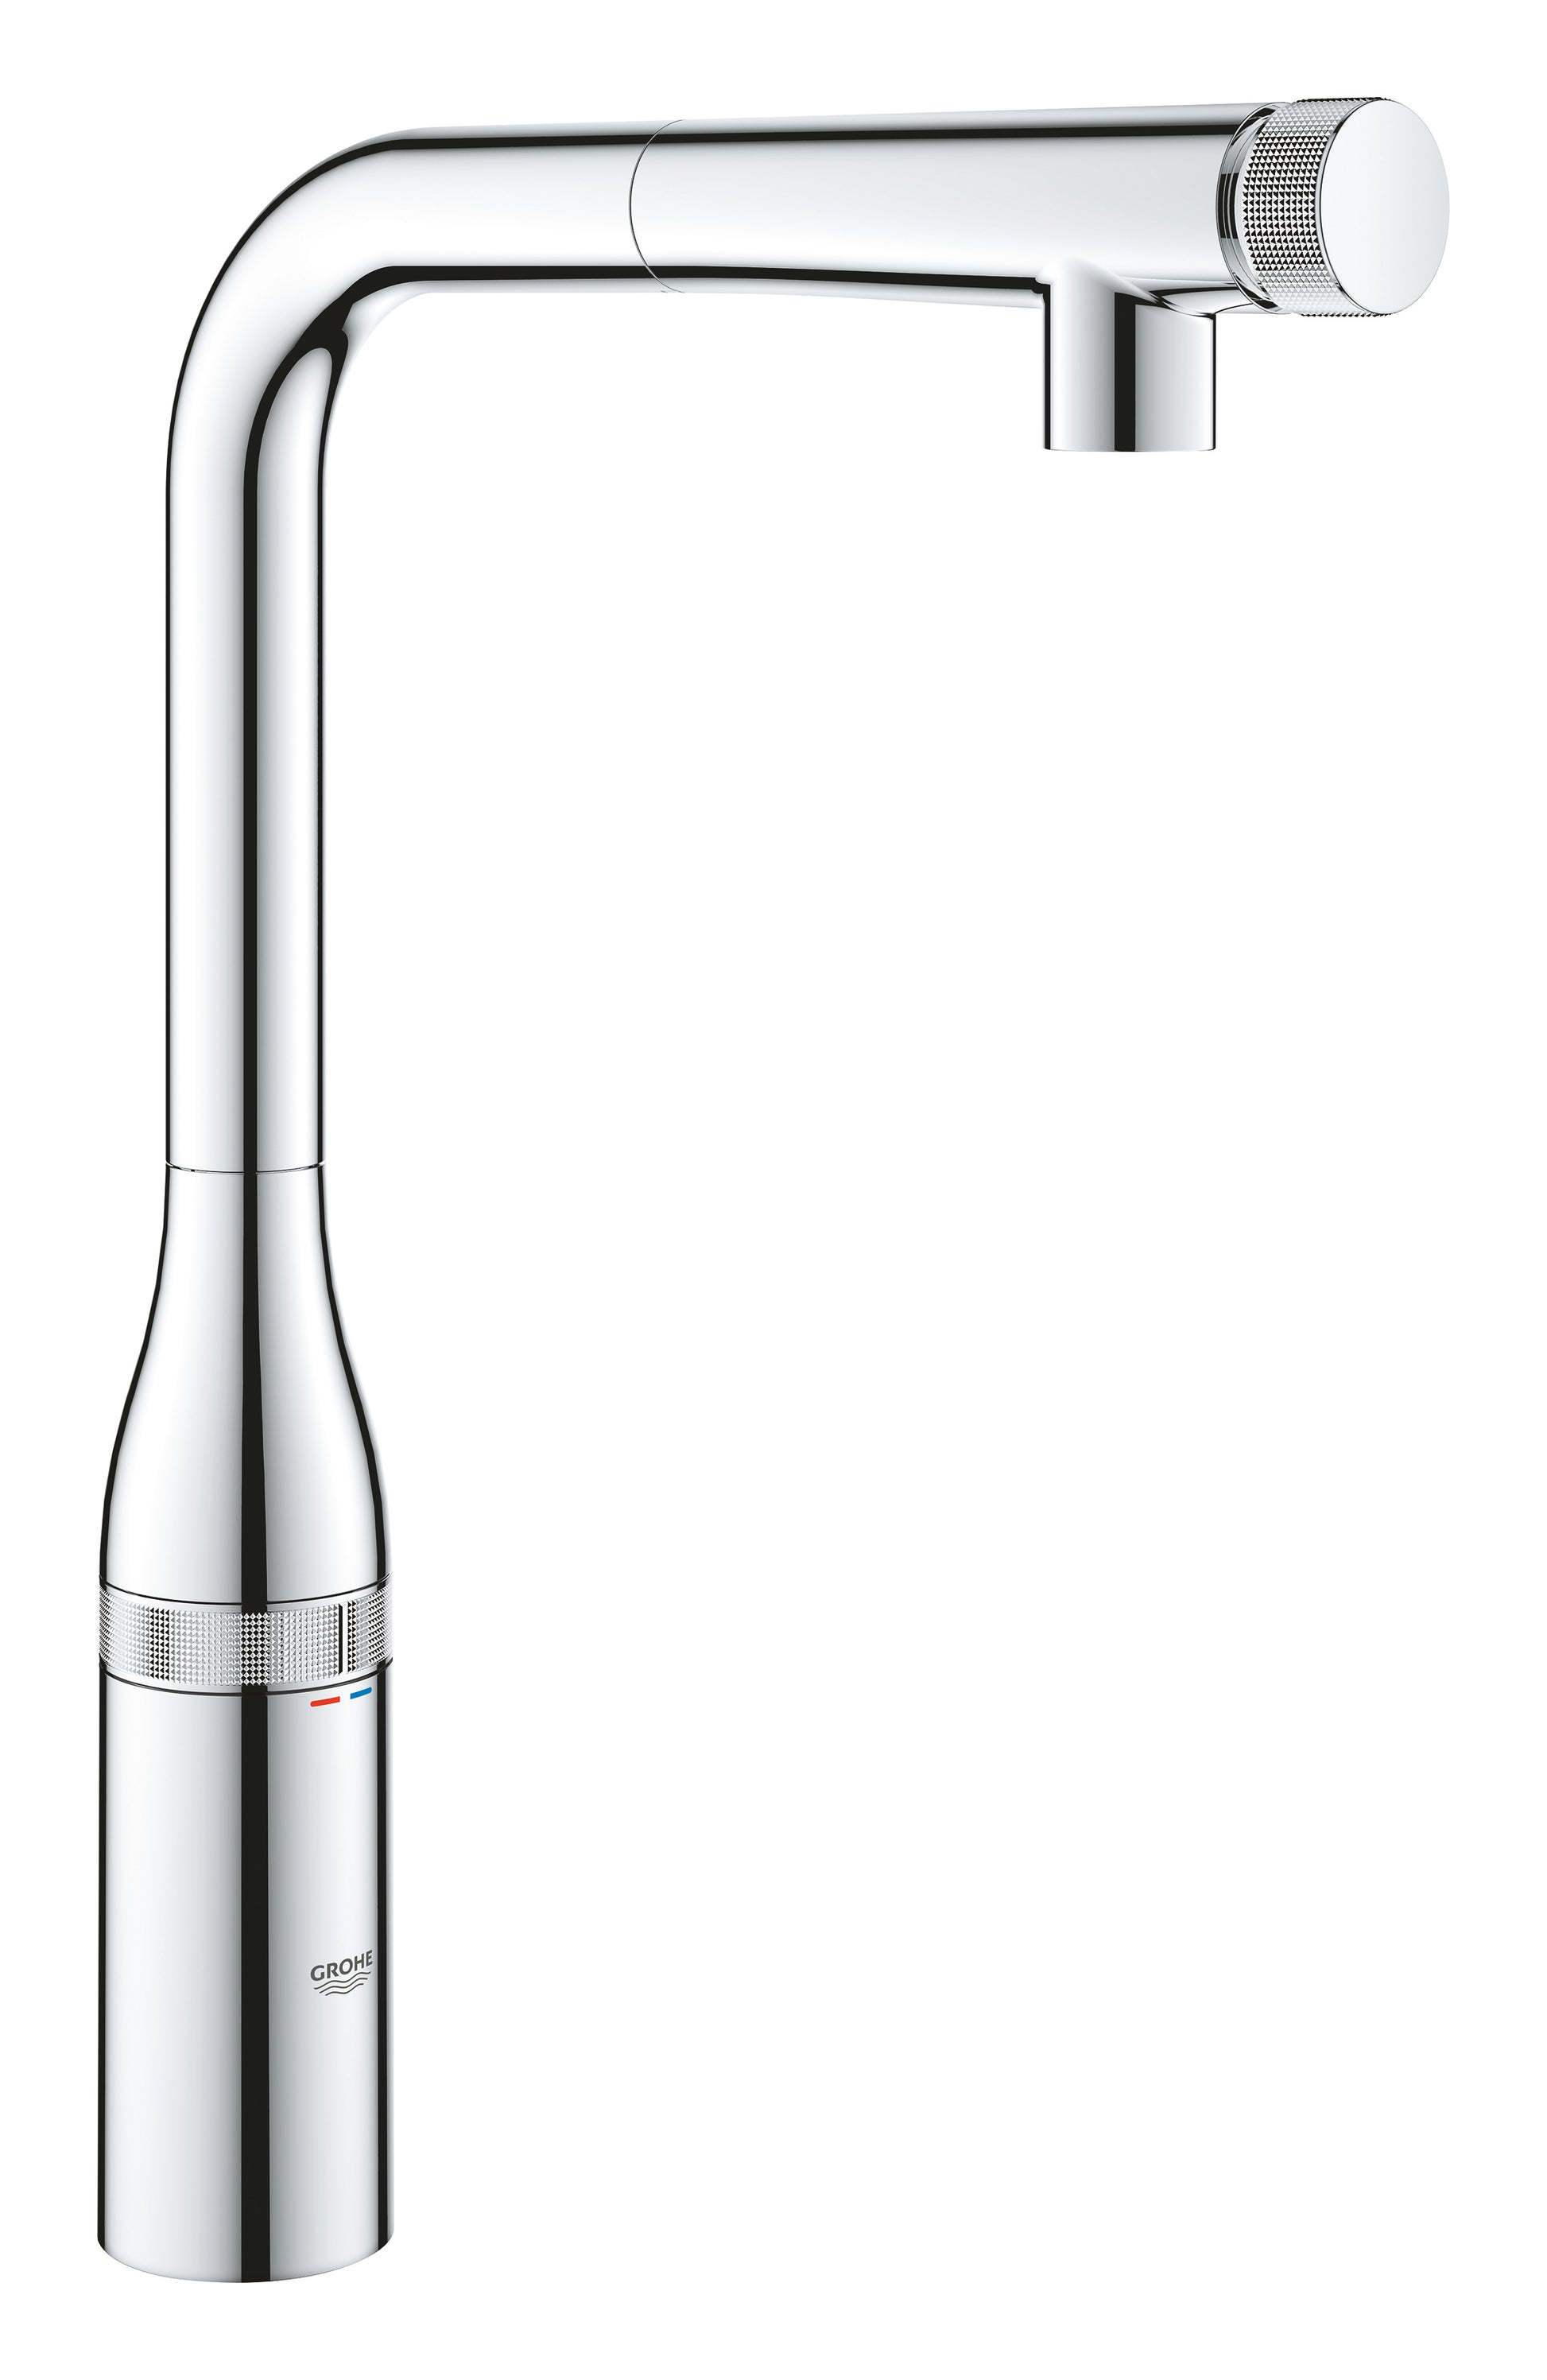 GROHE 31616000 Essence New Chrome SmartControl Pull-Out Single Spray Kitchen Faucet 1.75 GPM